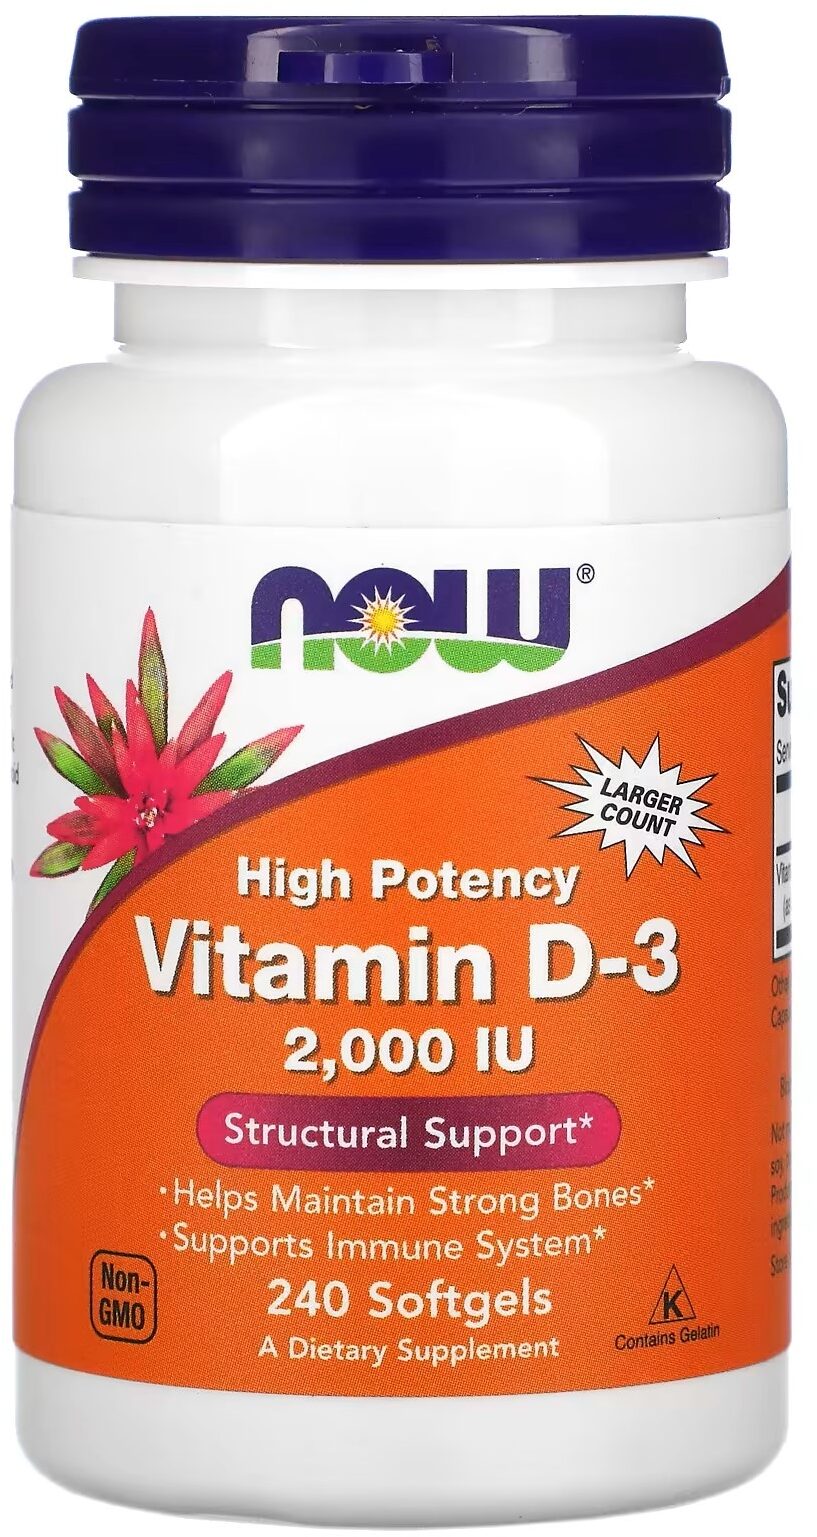 High potency vitamin D3 - Product